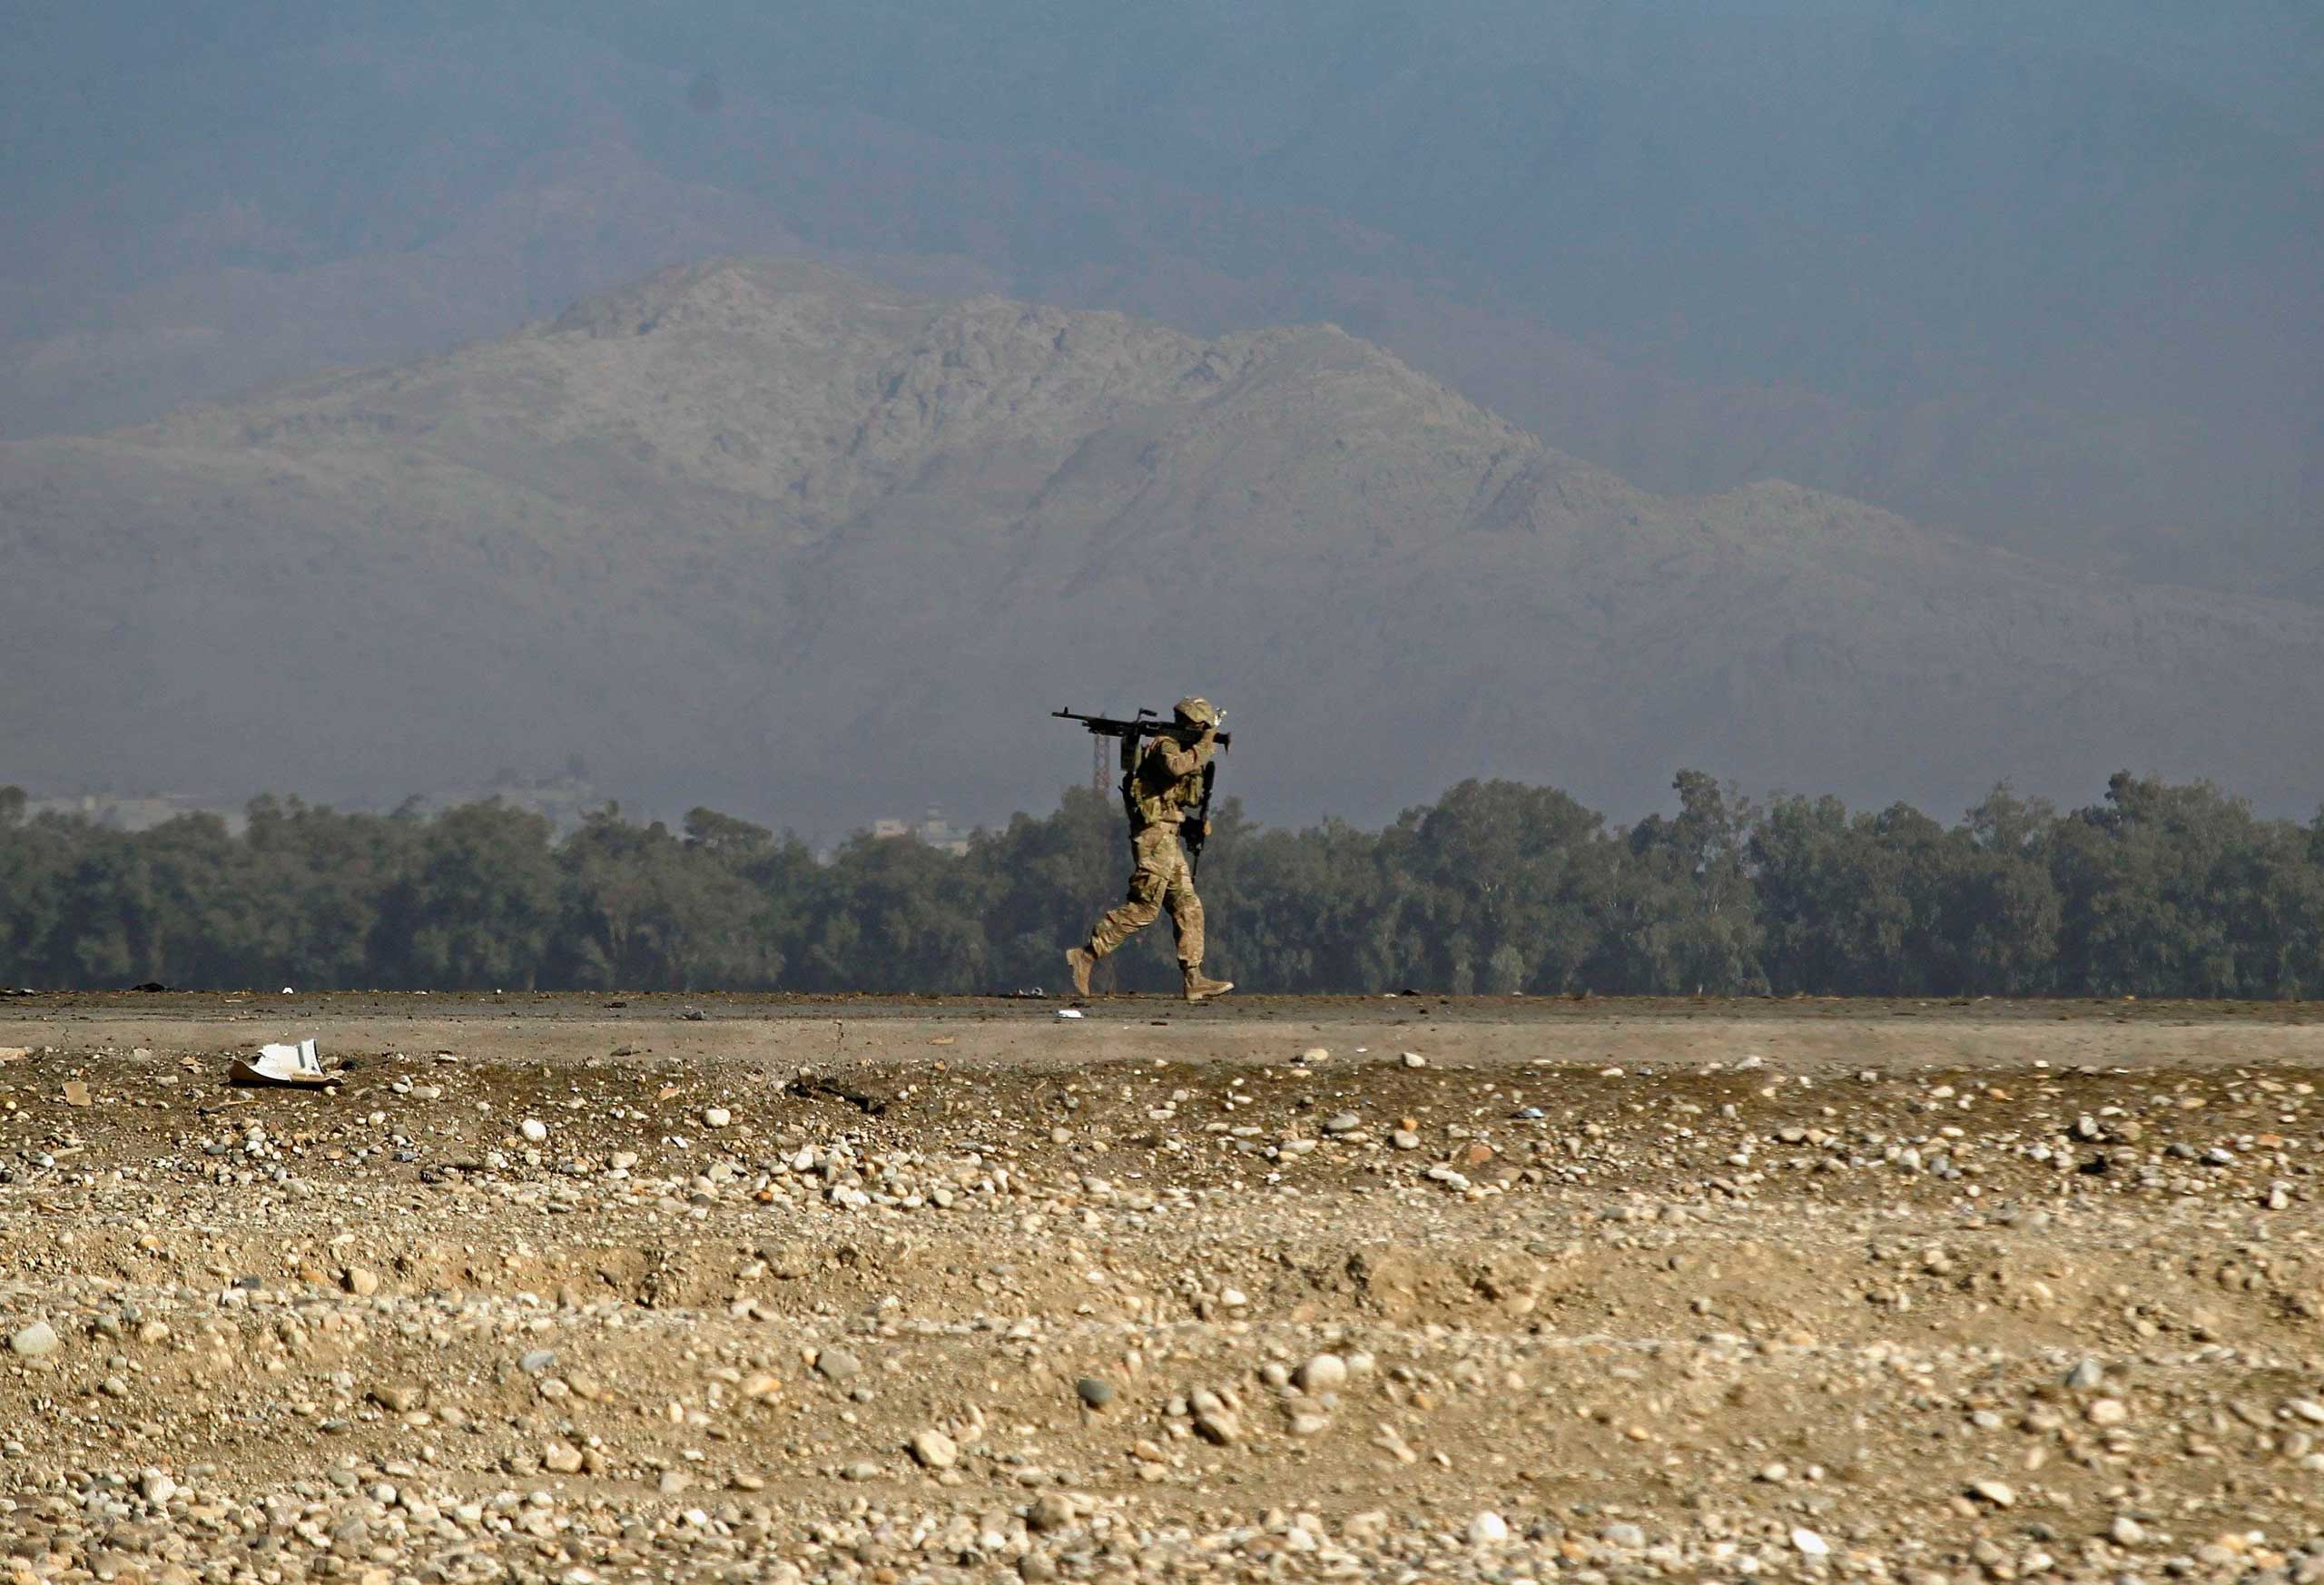 Nov. 13, 2014. A U.S. soldier walks at the site of a suicide attack on the outskirts of Jalalabad in eastern Afghanistan. The suicide bomber rammed his explosive-laden vehicle into U.S. forces traveling in a NATO convoy on Thursday. The attack caused no fatalities to foreign forces or civilians, but damaged an armored vehicle, the provincial spokesman Ahmadzia Abdulzai said.